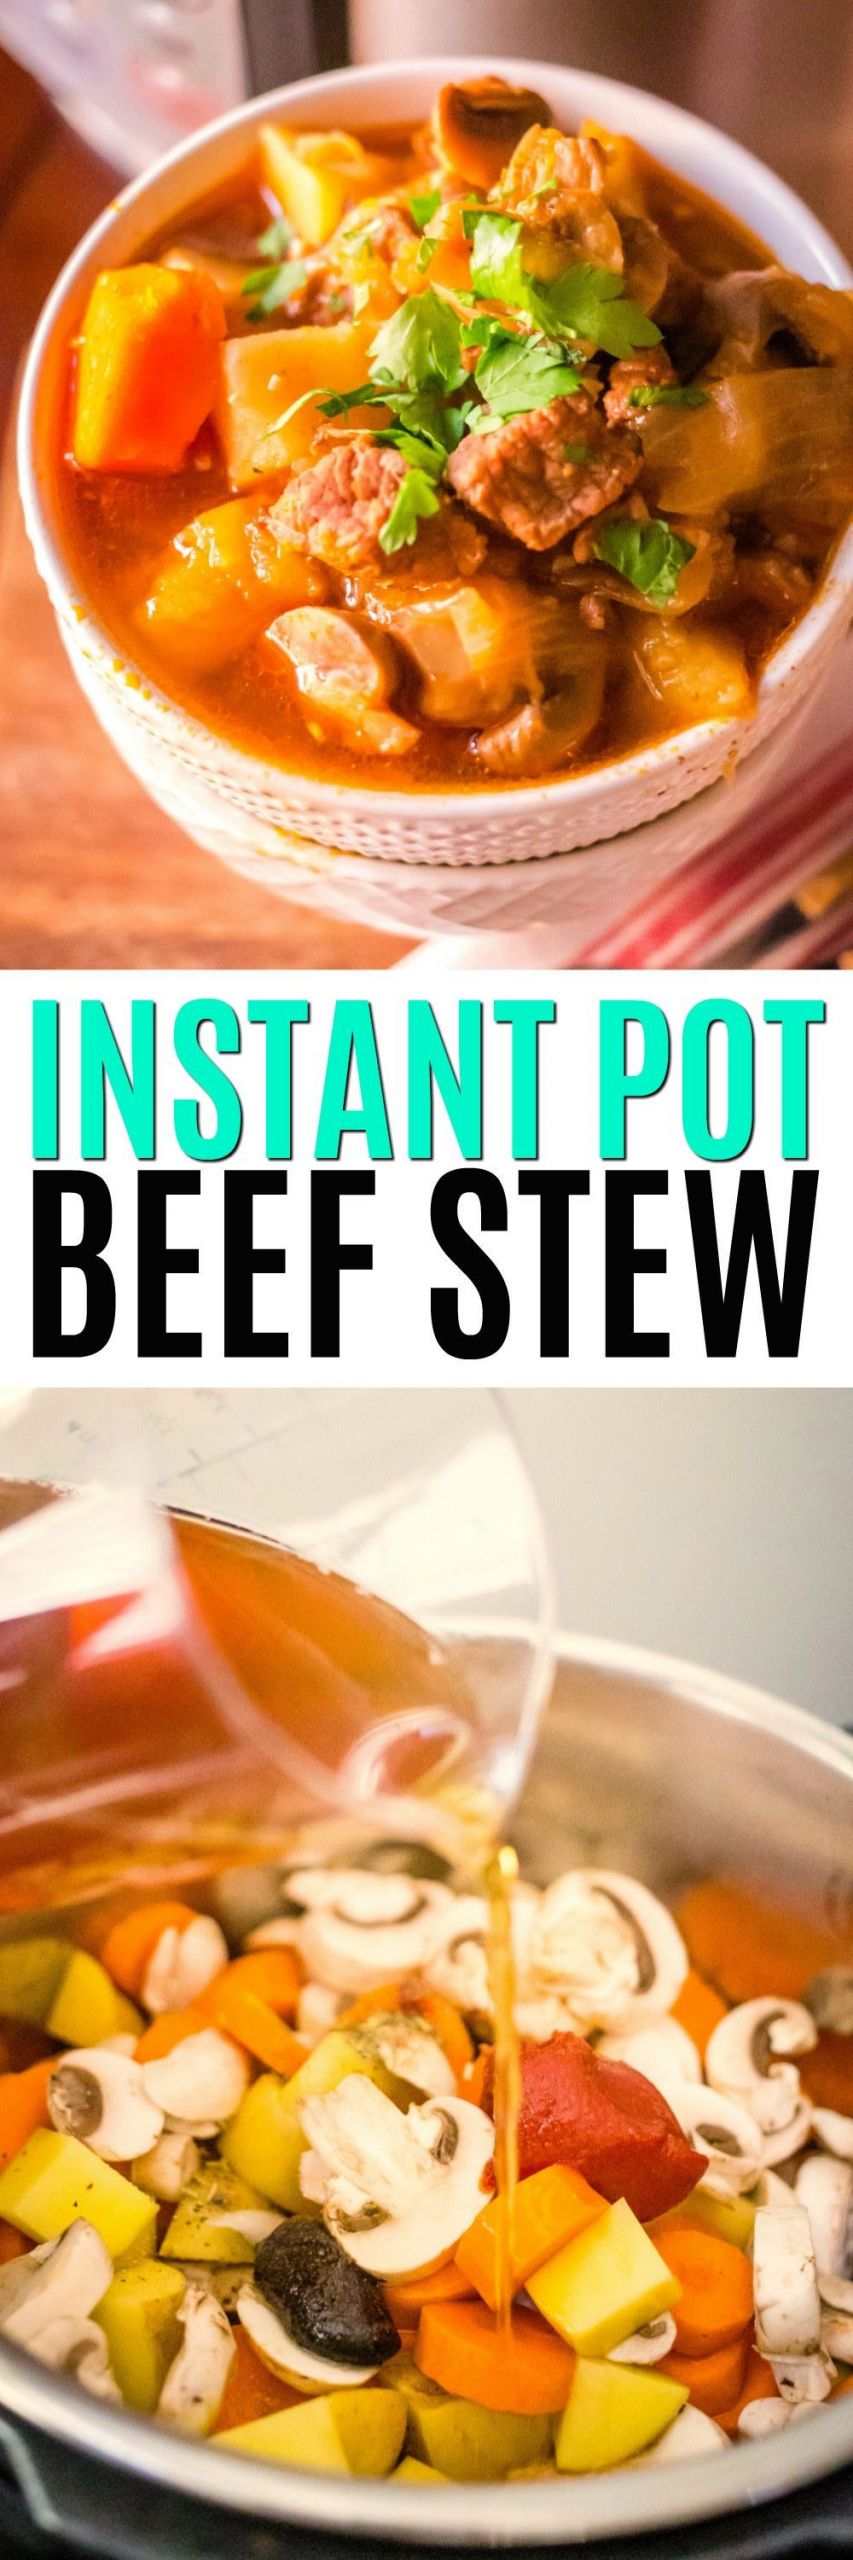 Winter Instant Pot Recipes
 Perfect for winter dinners this warm and hearty Instant